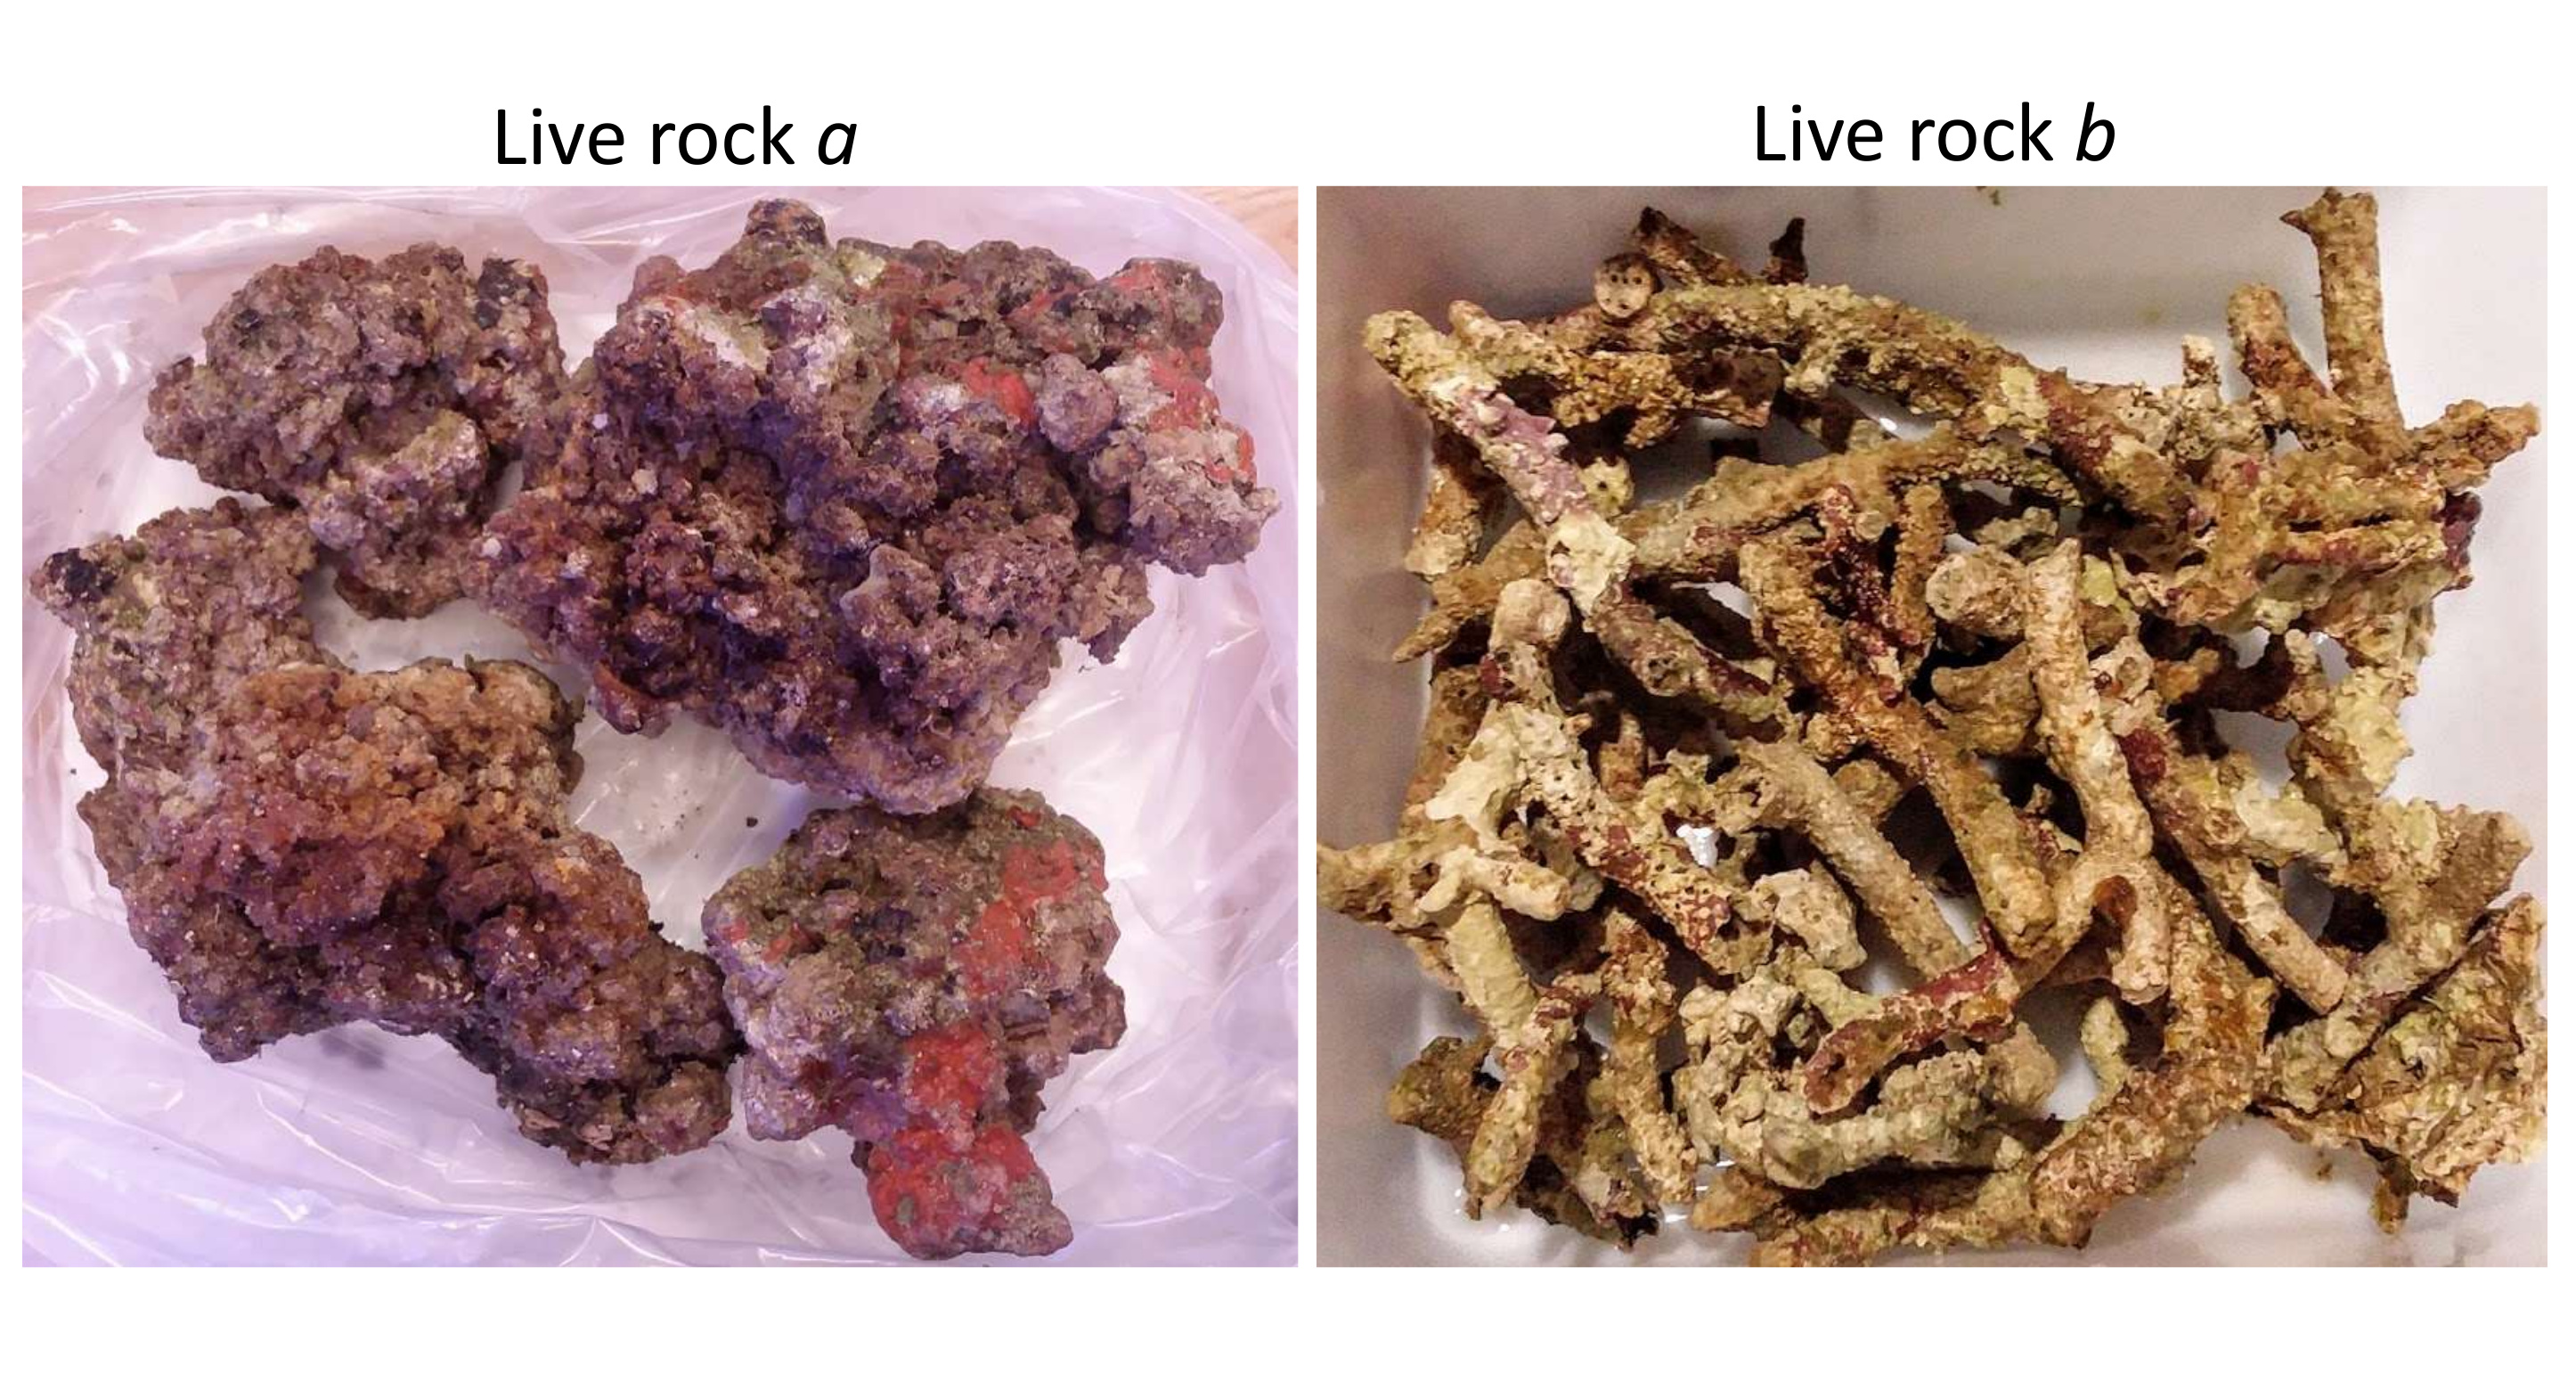 Figure 2: Images of the live rock used in this experiment.